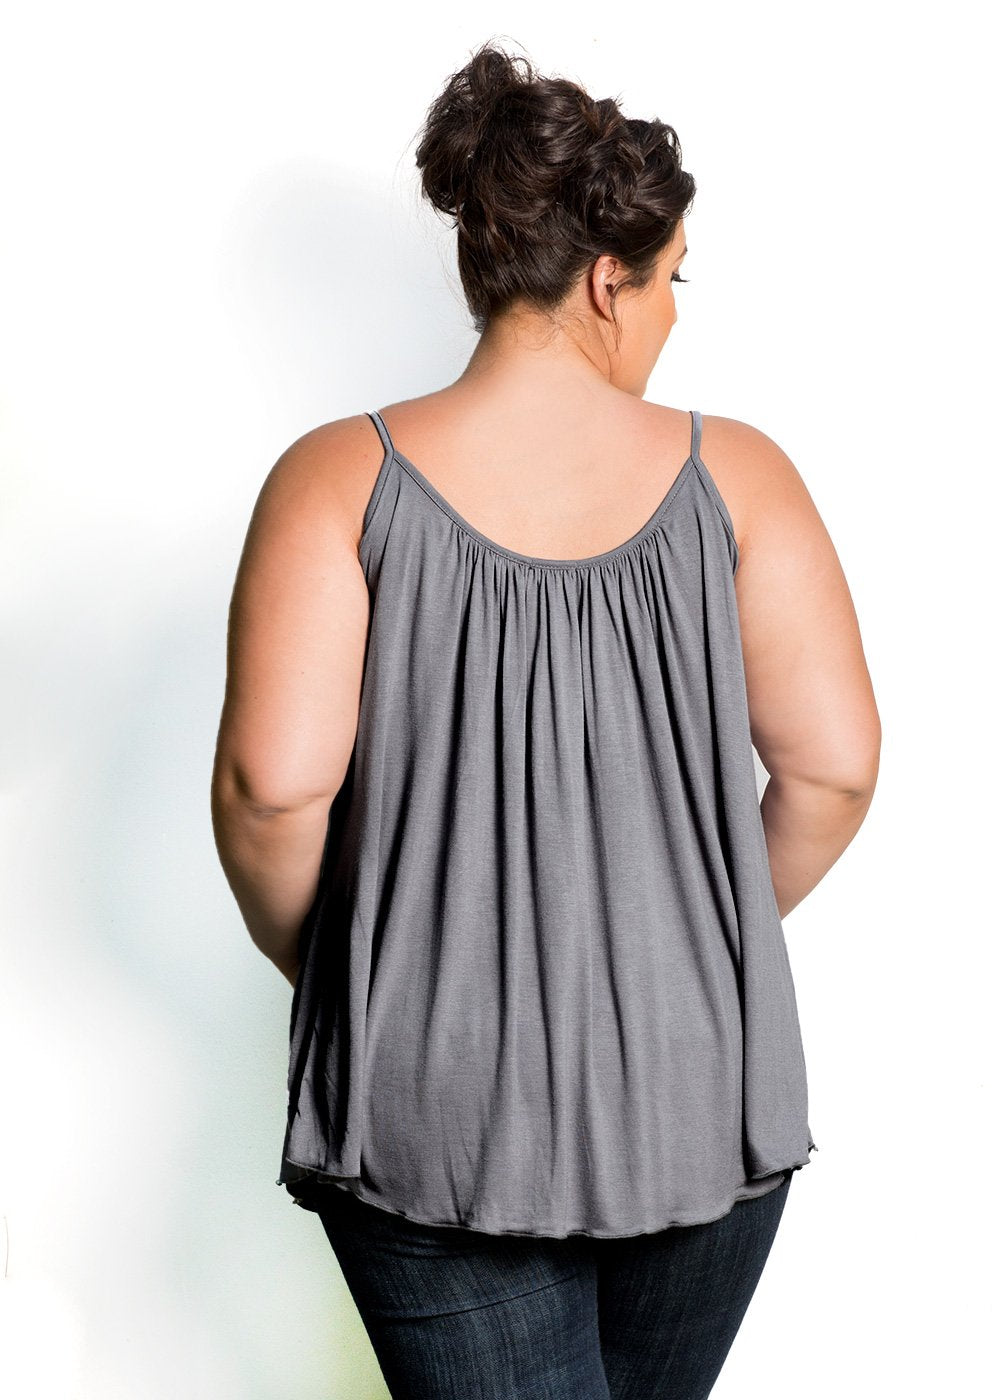 Stylish and Trendy Plus Size Tops, Pretty Cami